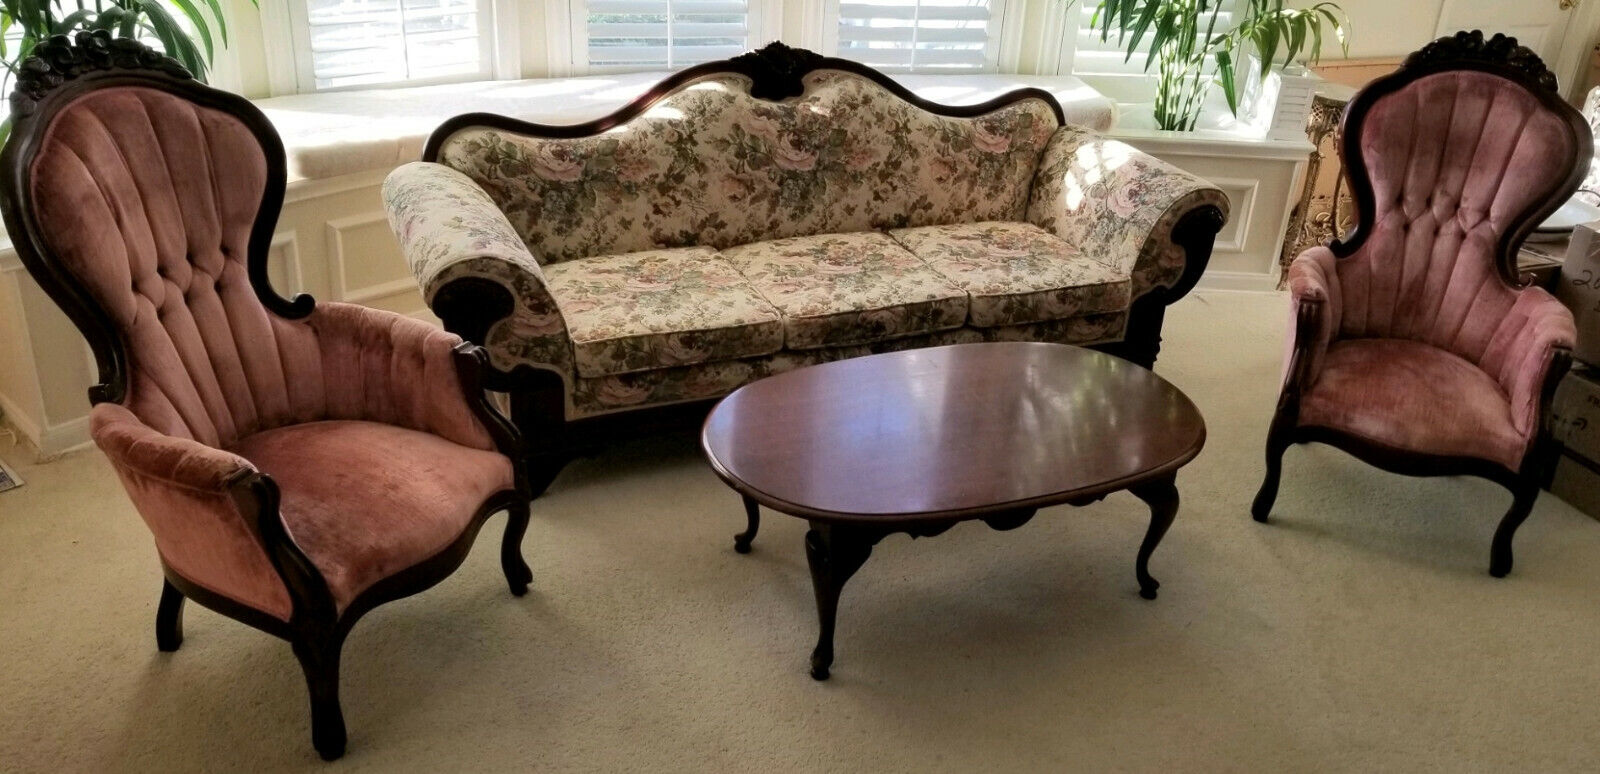 Vintage Victorian Empire Style Sofa Couch-2 Gentlemans Chairs-Oval Coffee Table Empire - фотография #2